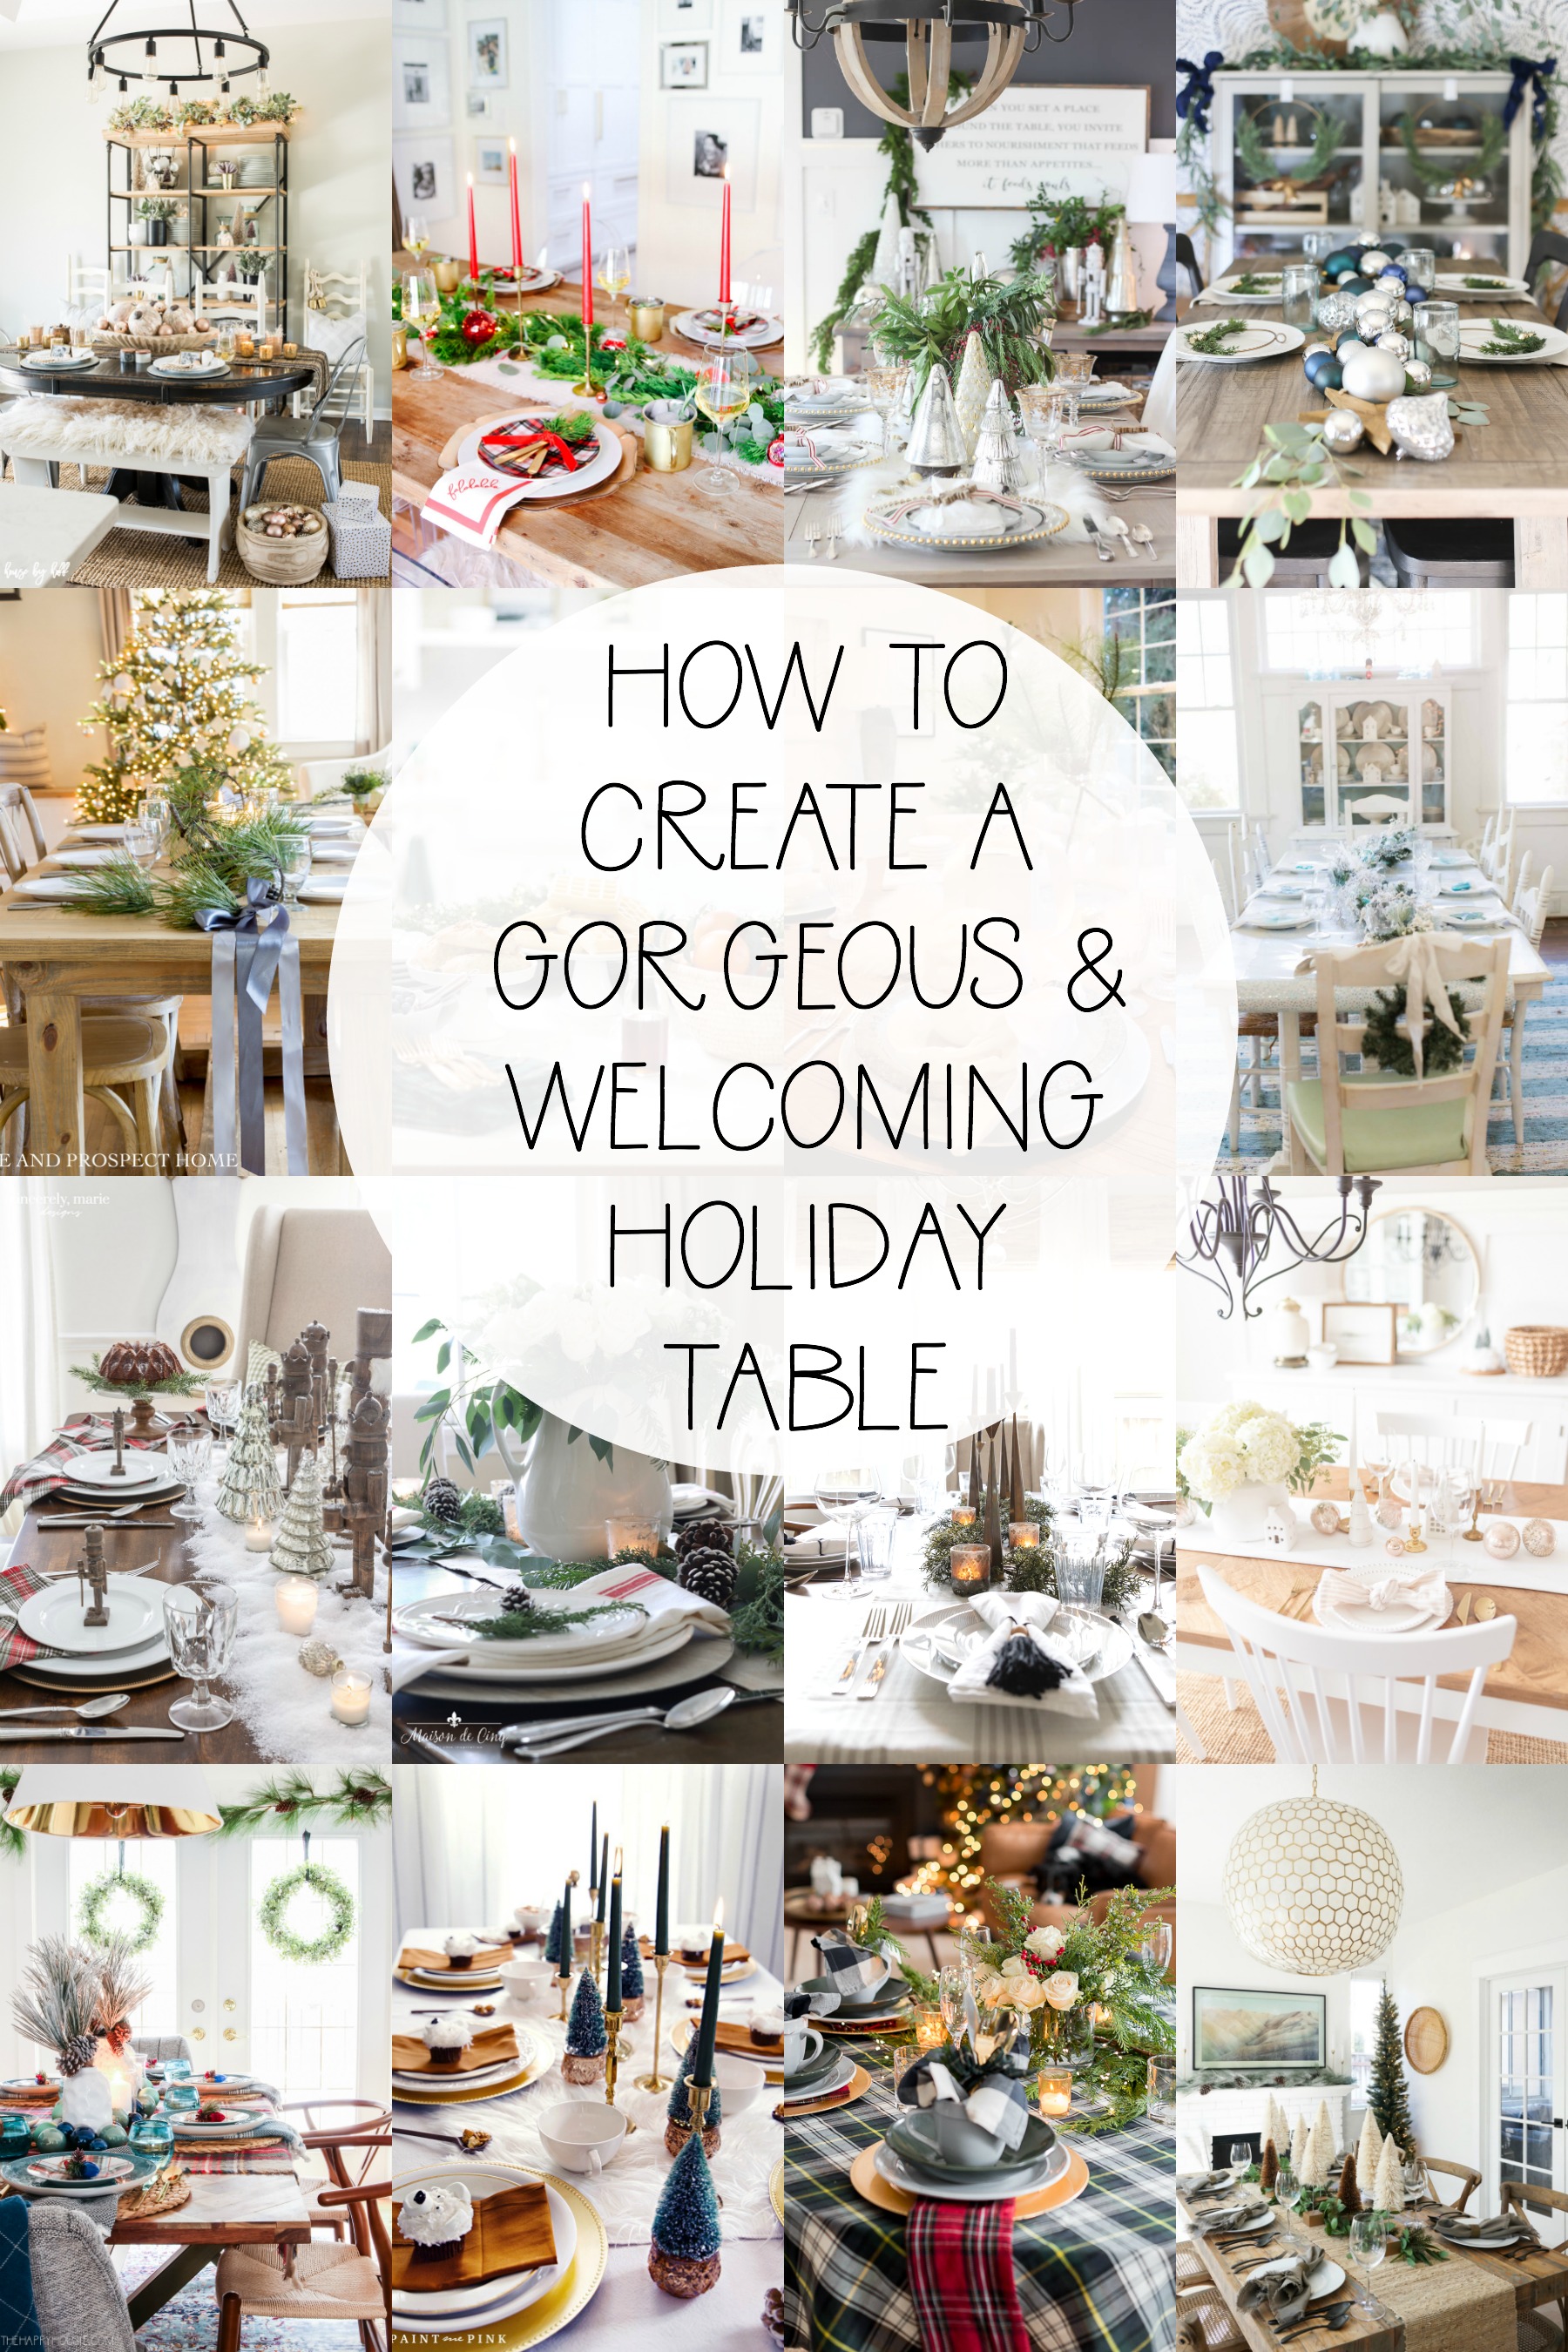 How To Create A Gorgeous & Welcoming Holiday Table poster.